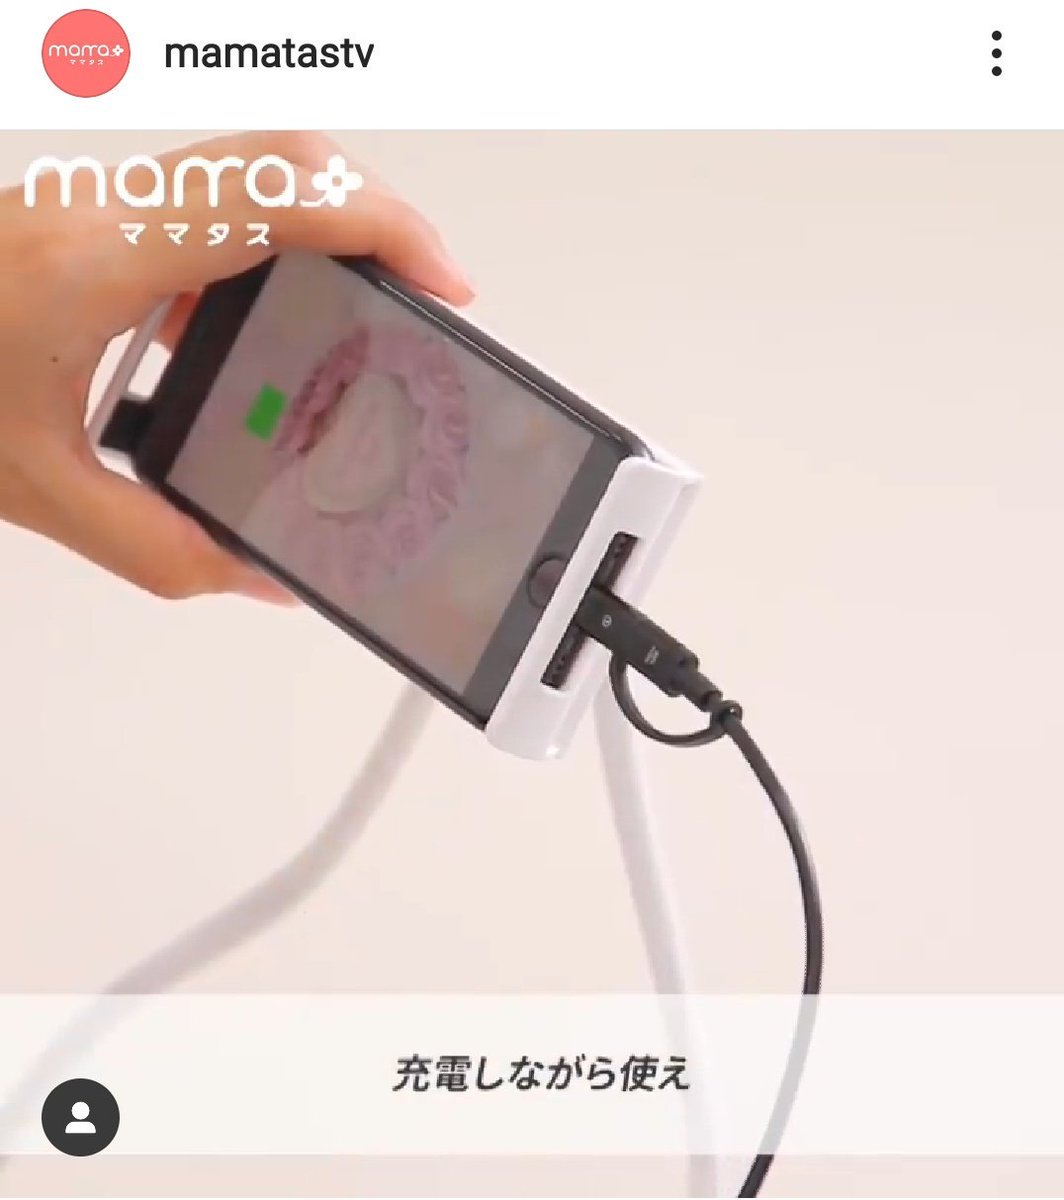 3coinsの首かけスマホホルダーが快適そう Togetter